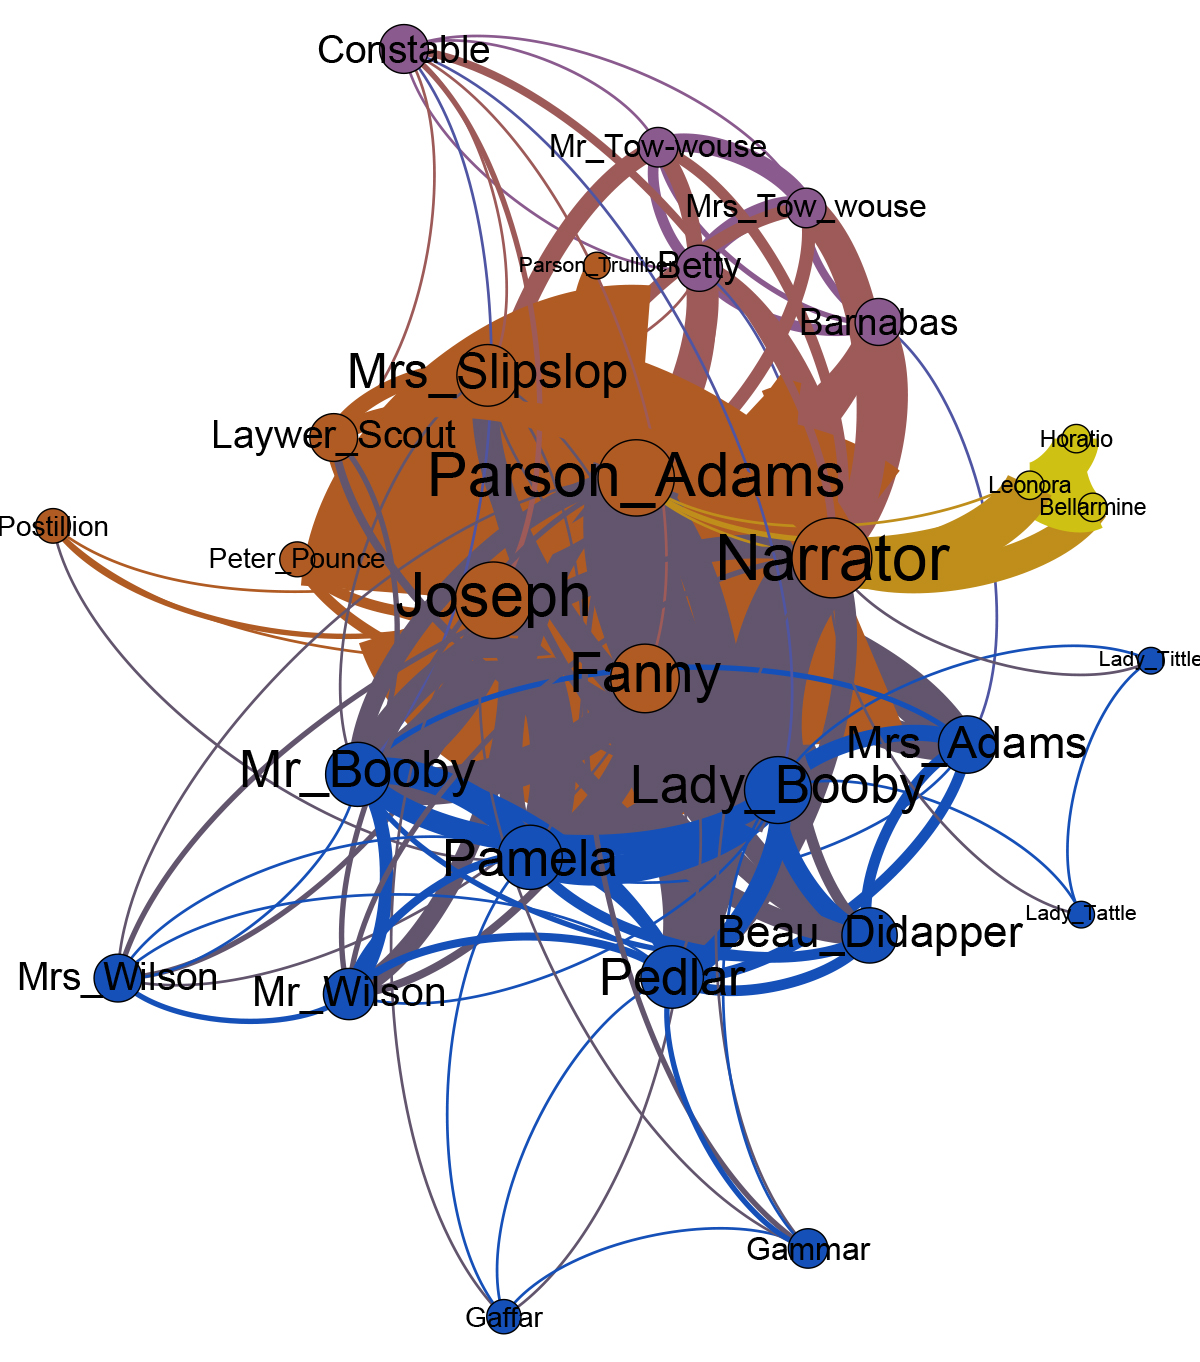 Network of Interactions in Joseph Andrews